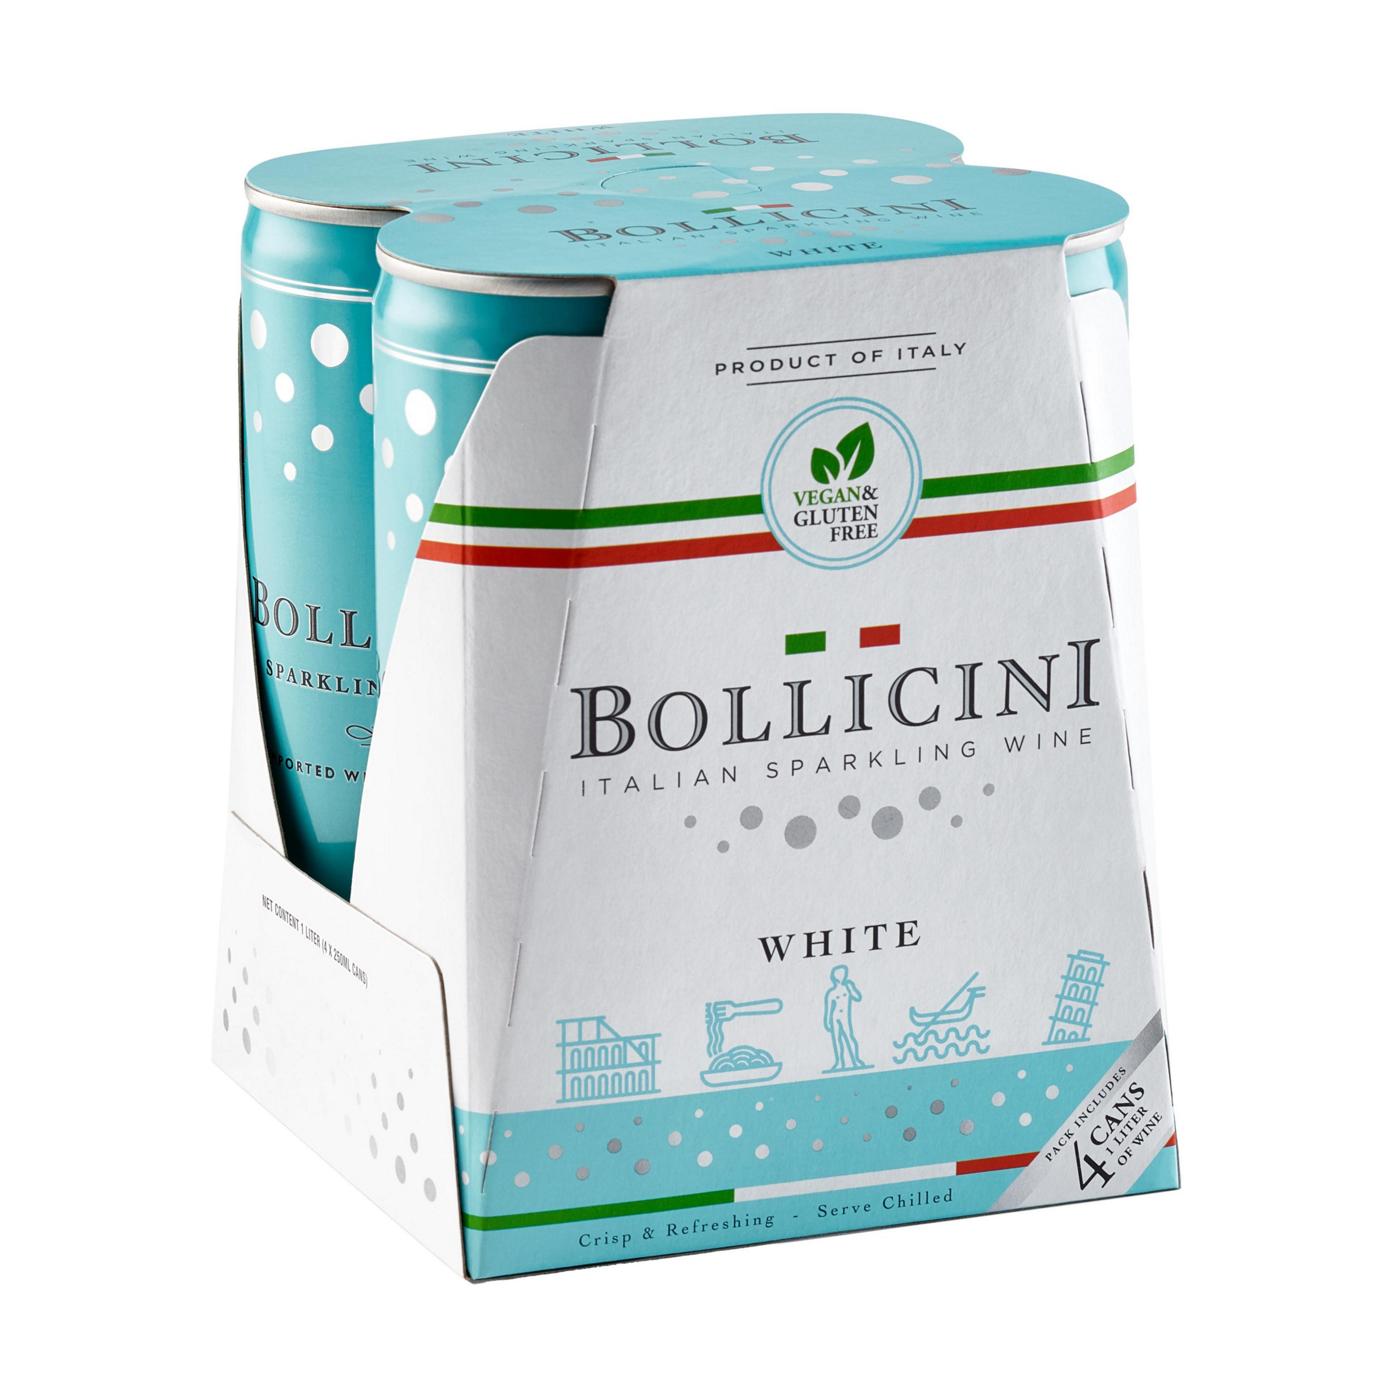 Bollicini Sparkling White Wine 250 mL Cans; image 1 of 2